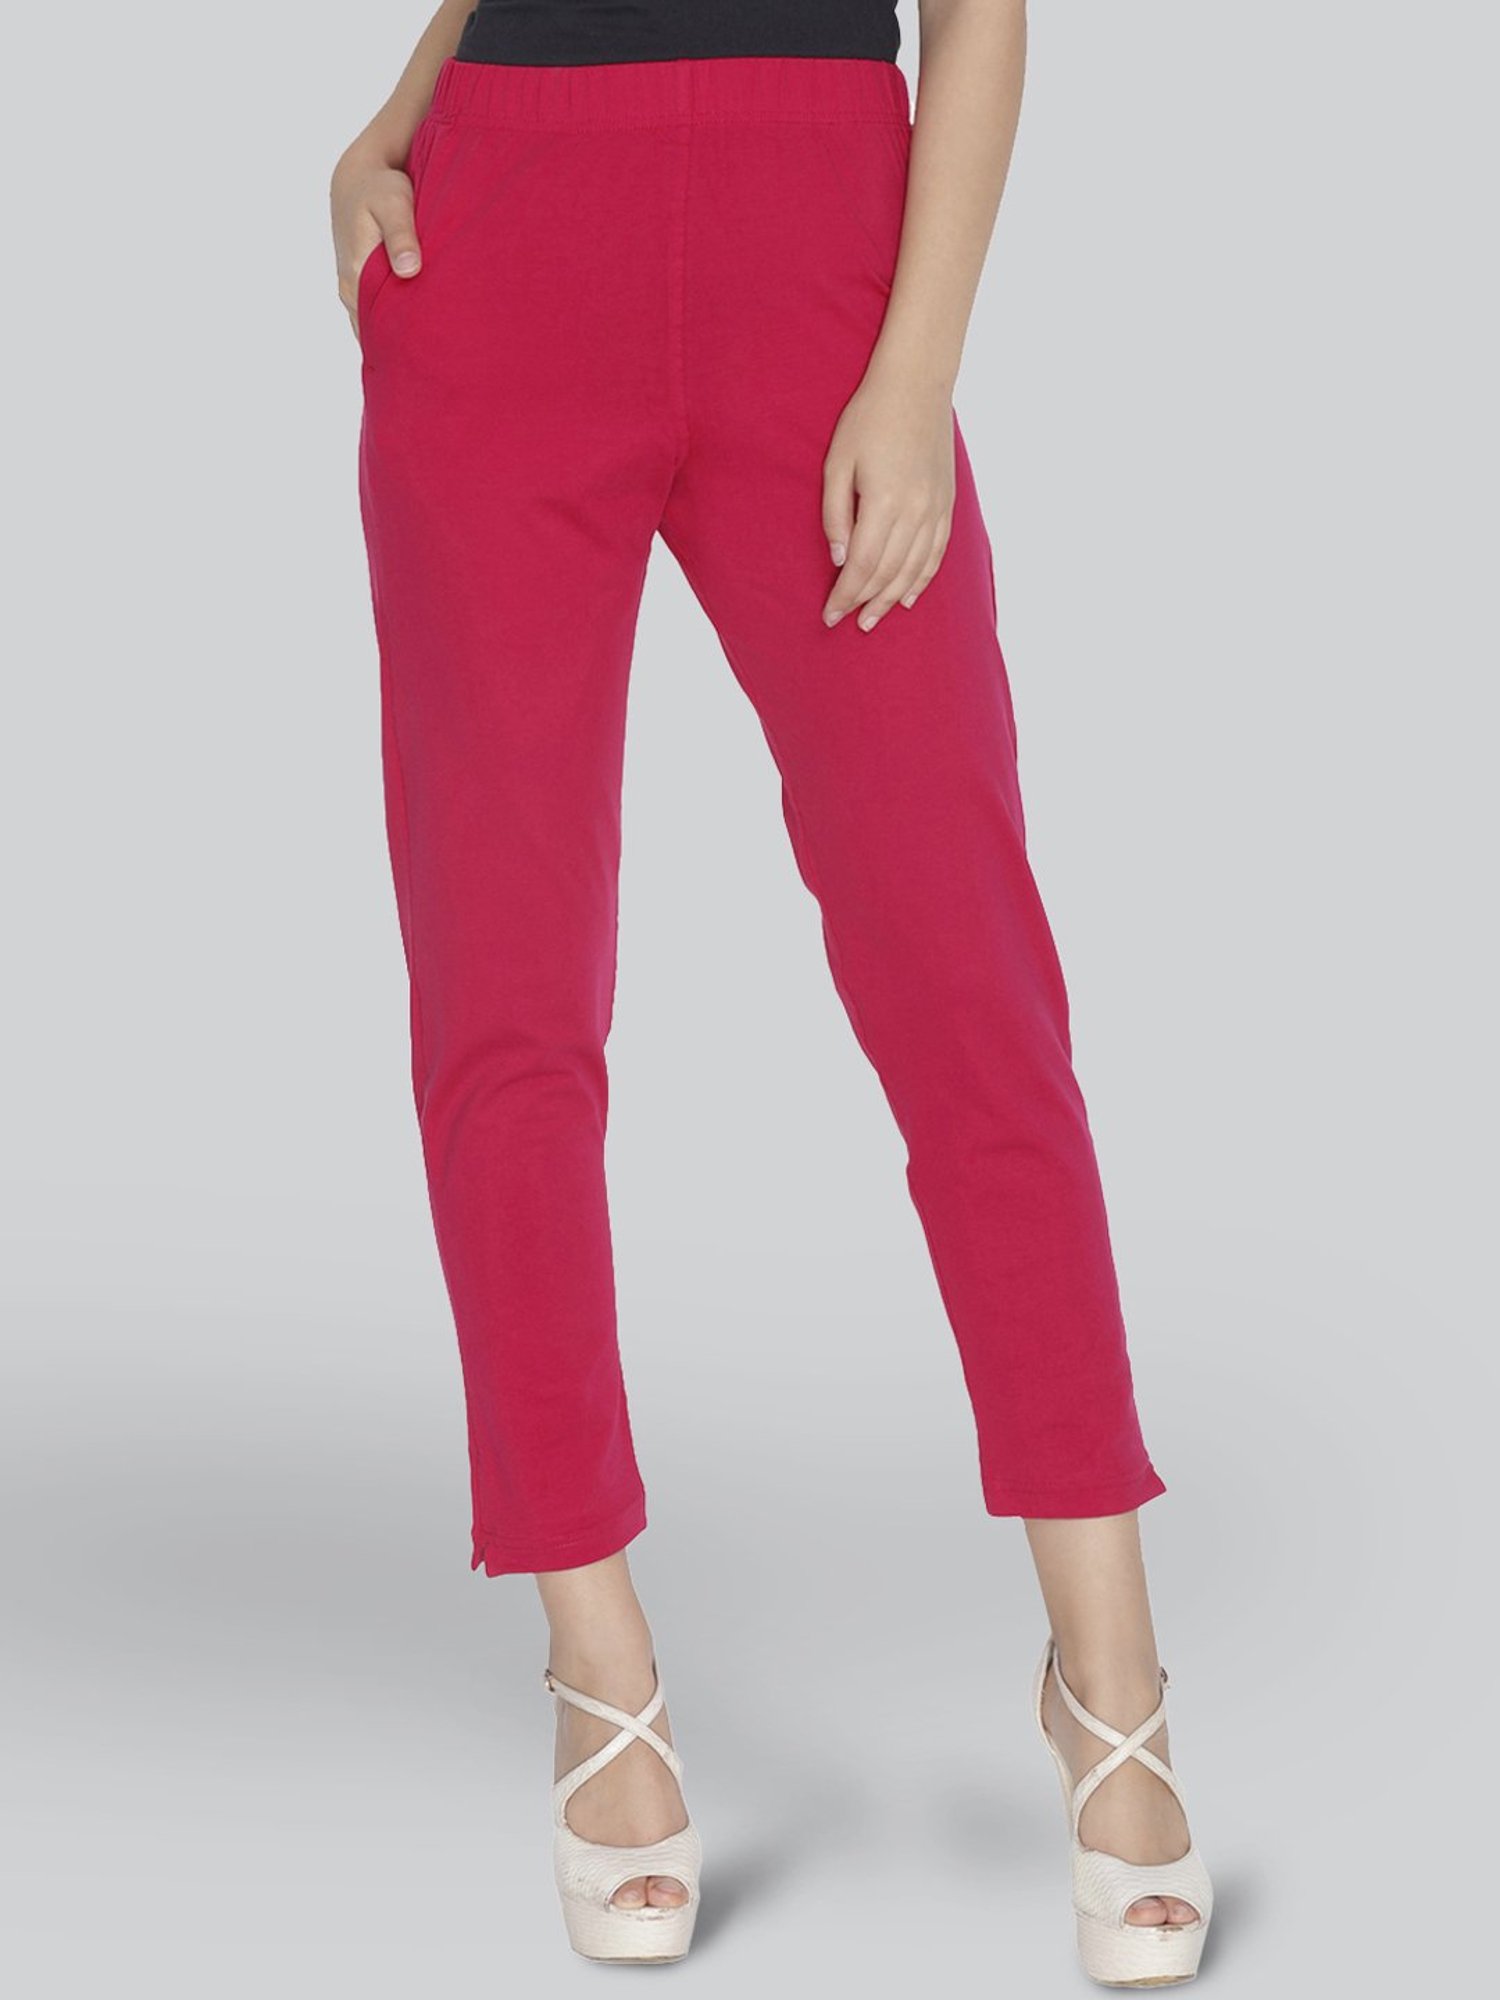 Preview Carrie Ankle Length Bengaline Cigar Pants | Target Australia